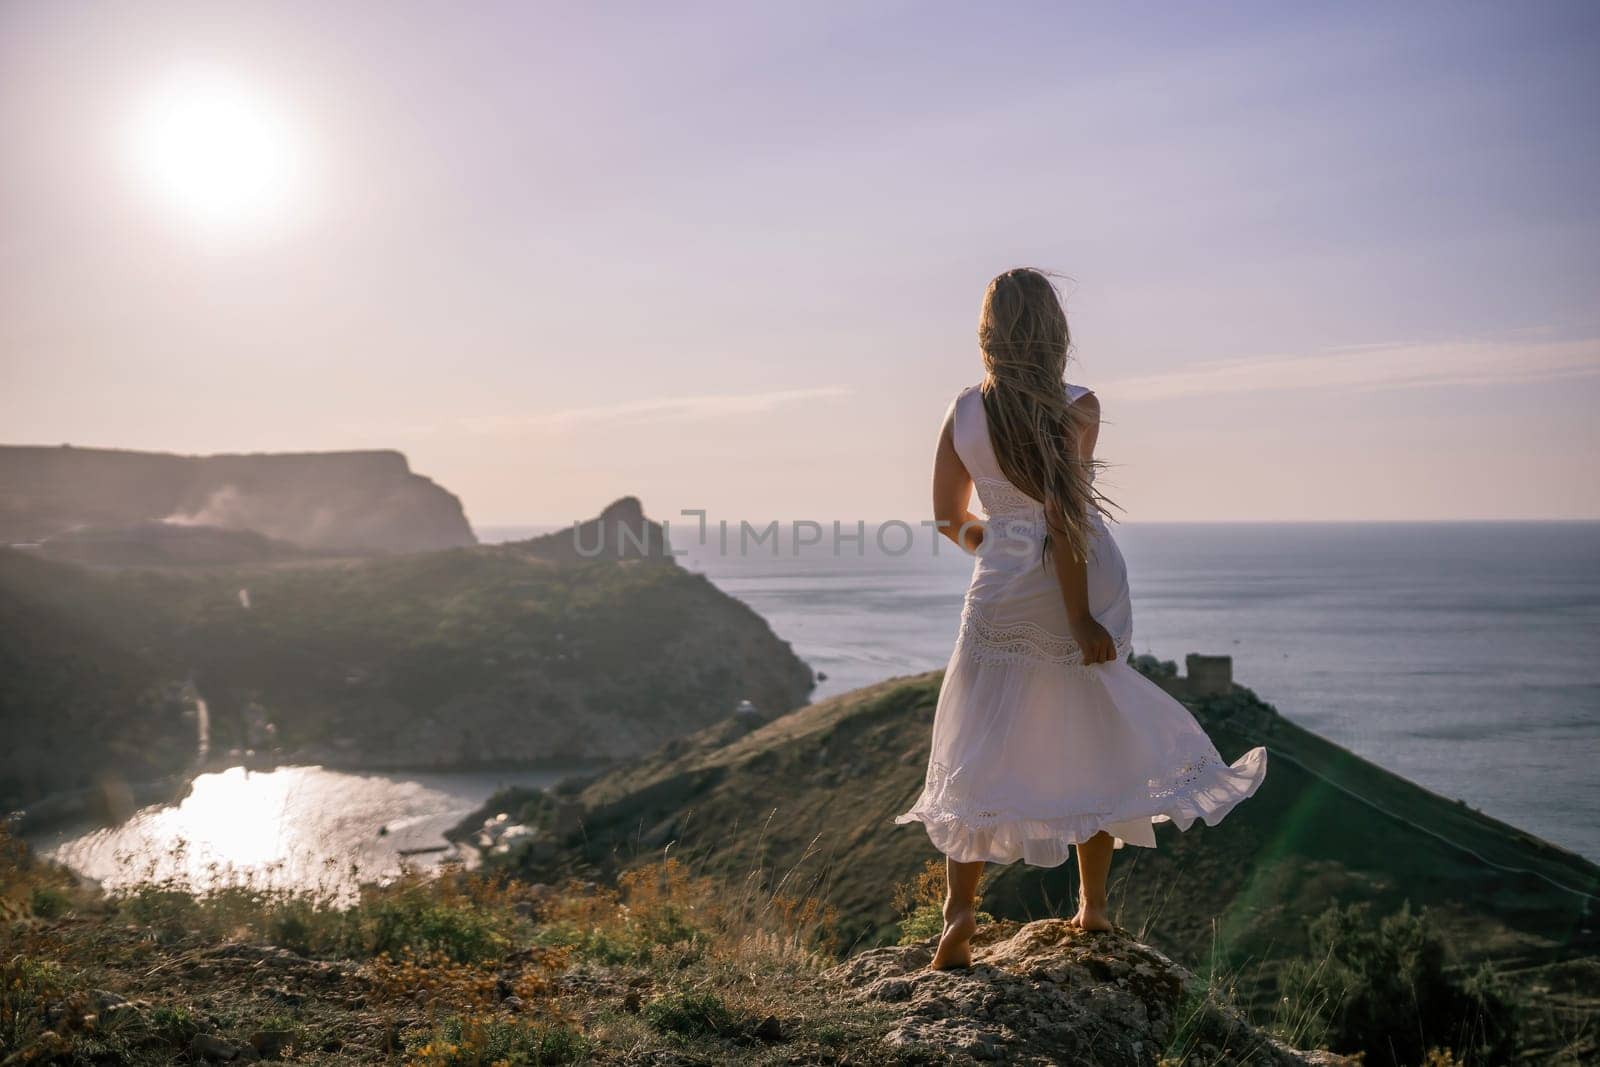 A woman in a white dress stands on a hill overlooking the ocean. The scene is serene and peaceful, with the woman's dress billowing in the wind. The combination of the ocean. by Matiunina